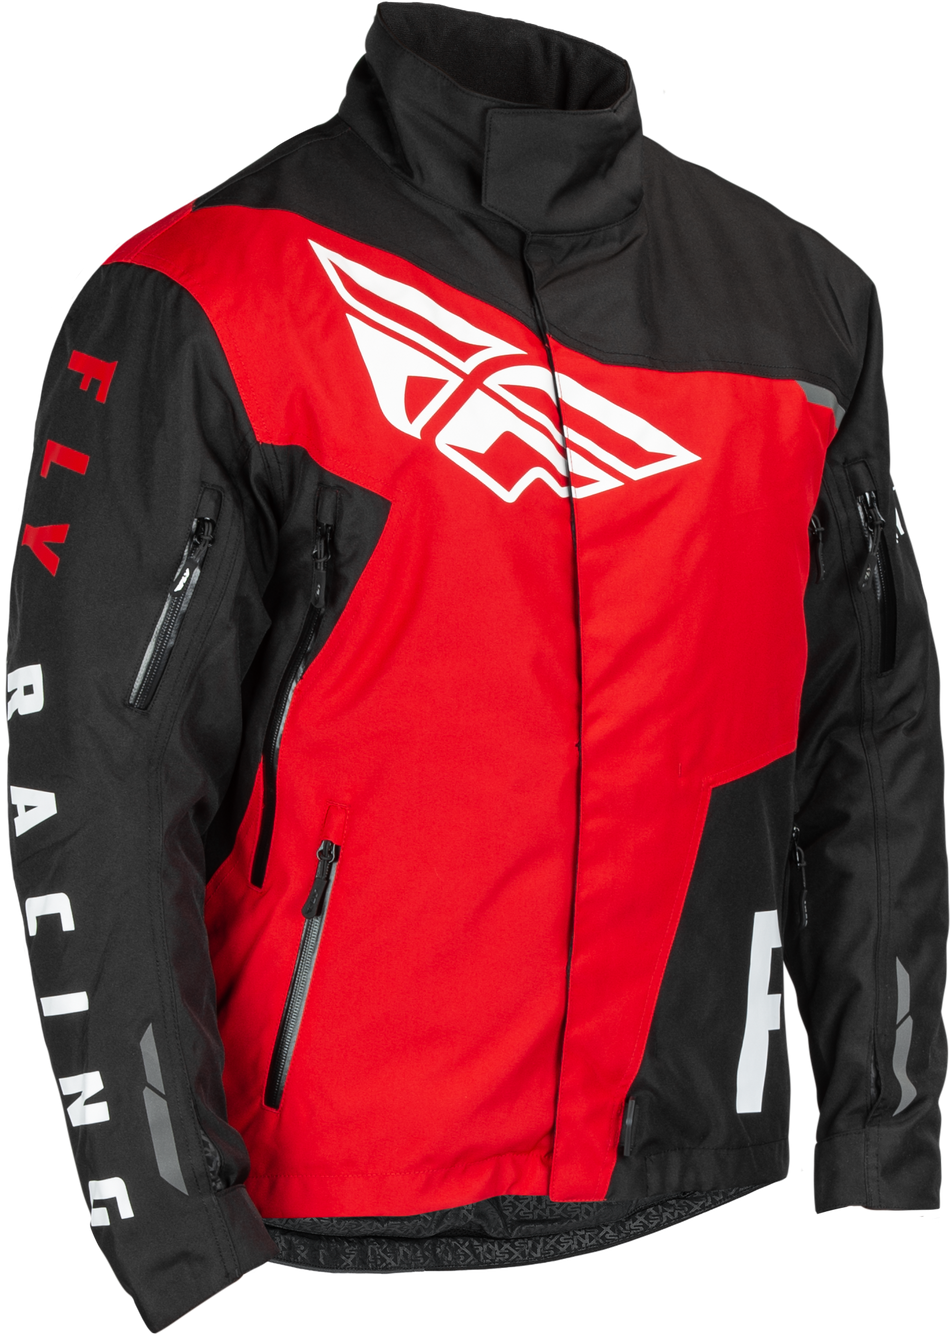 FLY RACING Youth Snx Pro Jacket Black/Red Yl 470-5402YL